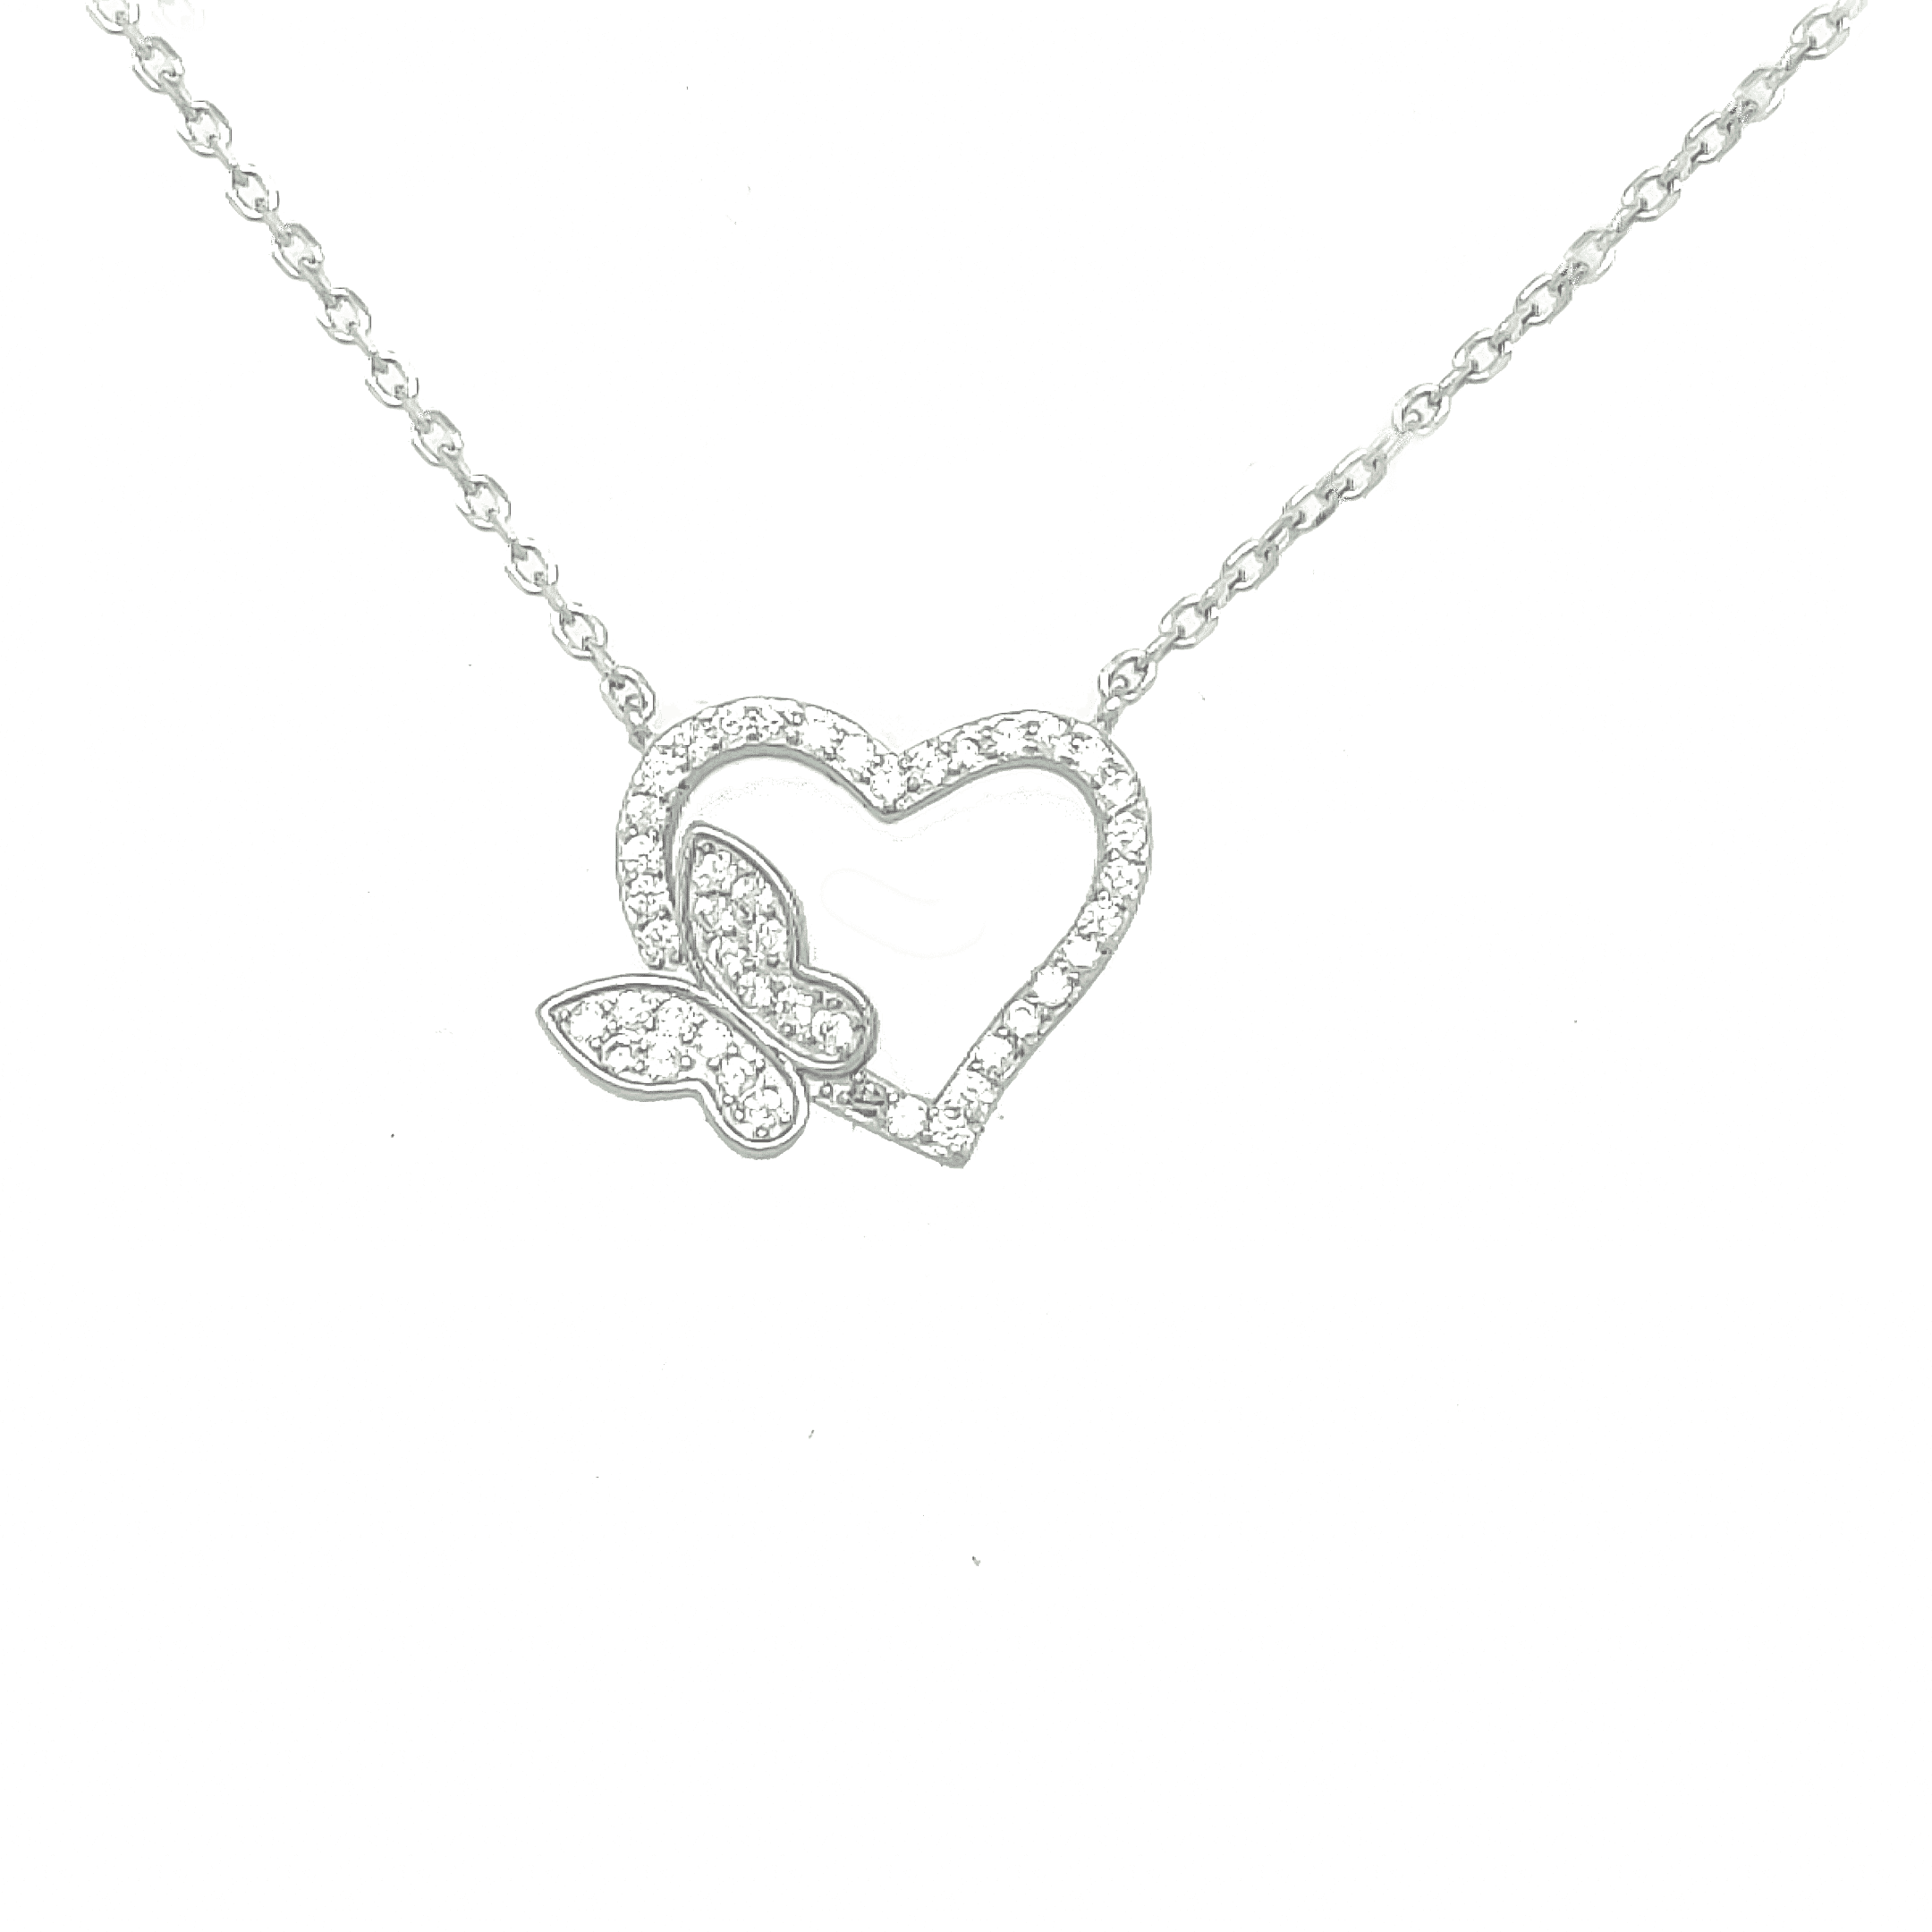 Asfour 925 Sterling Silver Necklace - NR0162